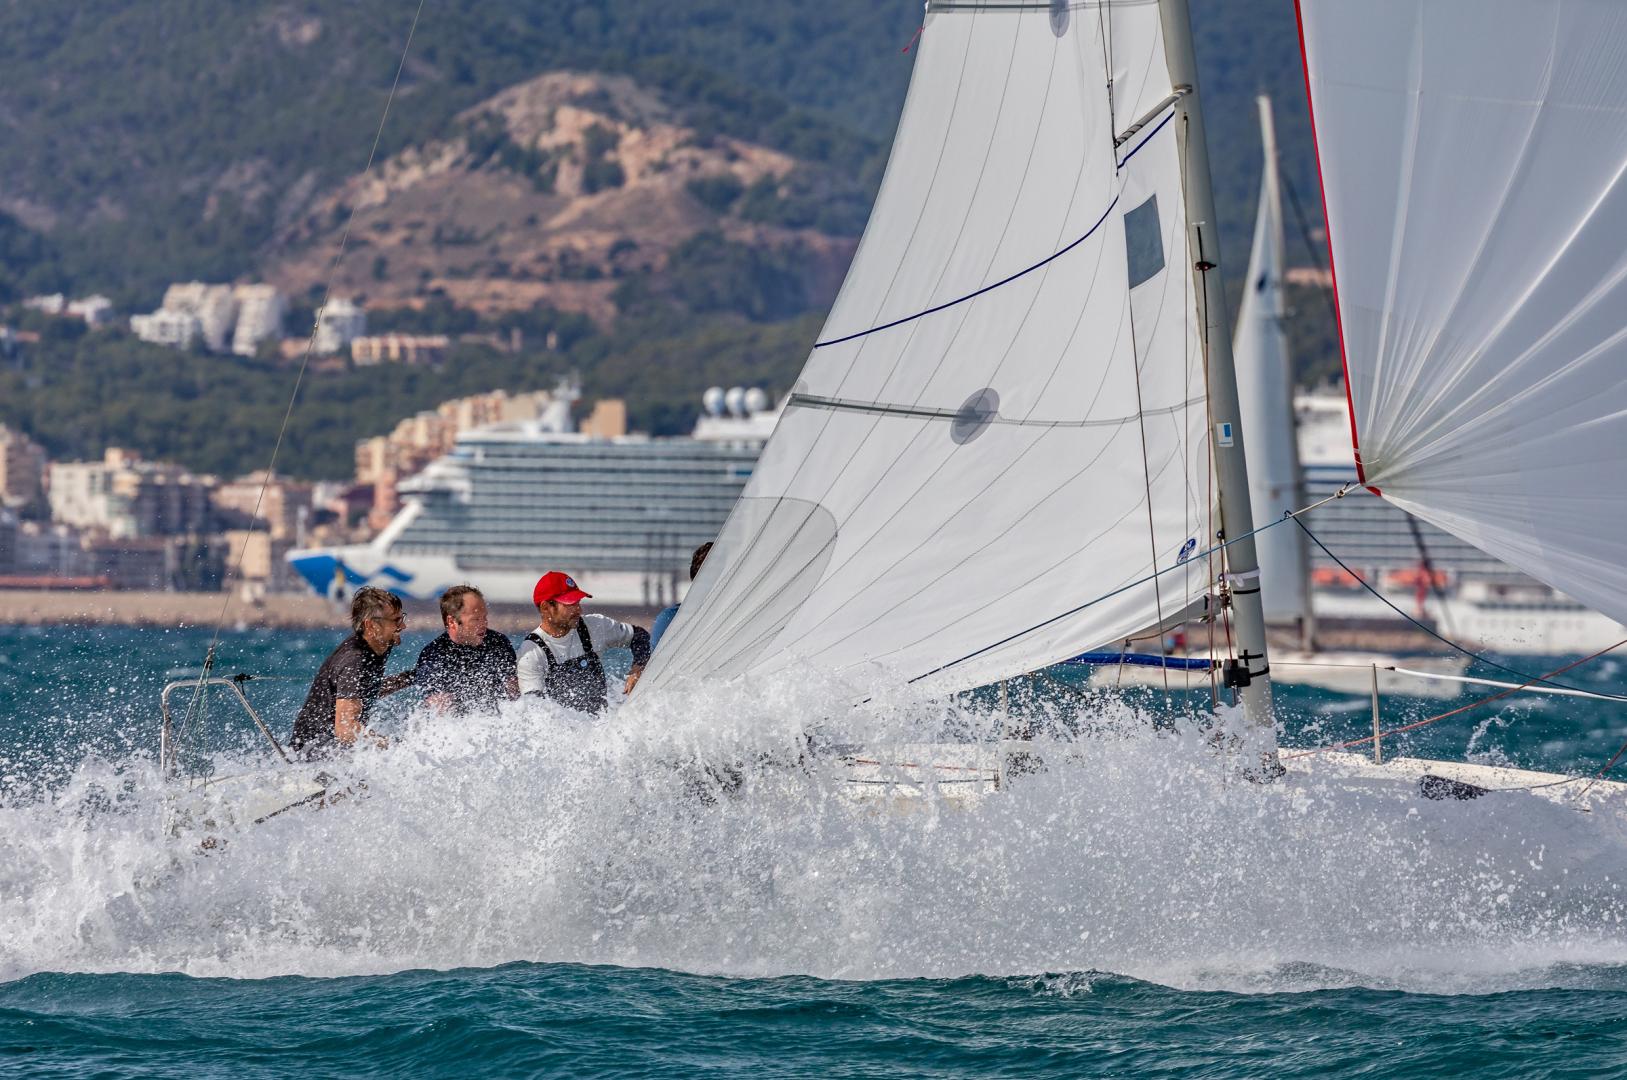 No tricks as bay of Palma delivers strong breeze for PalmaVela finale